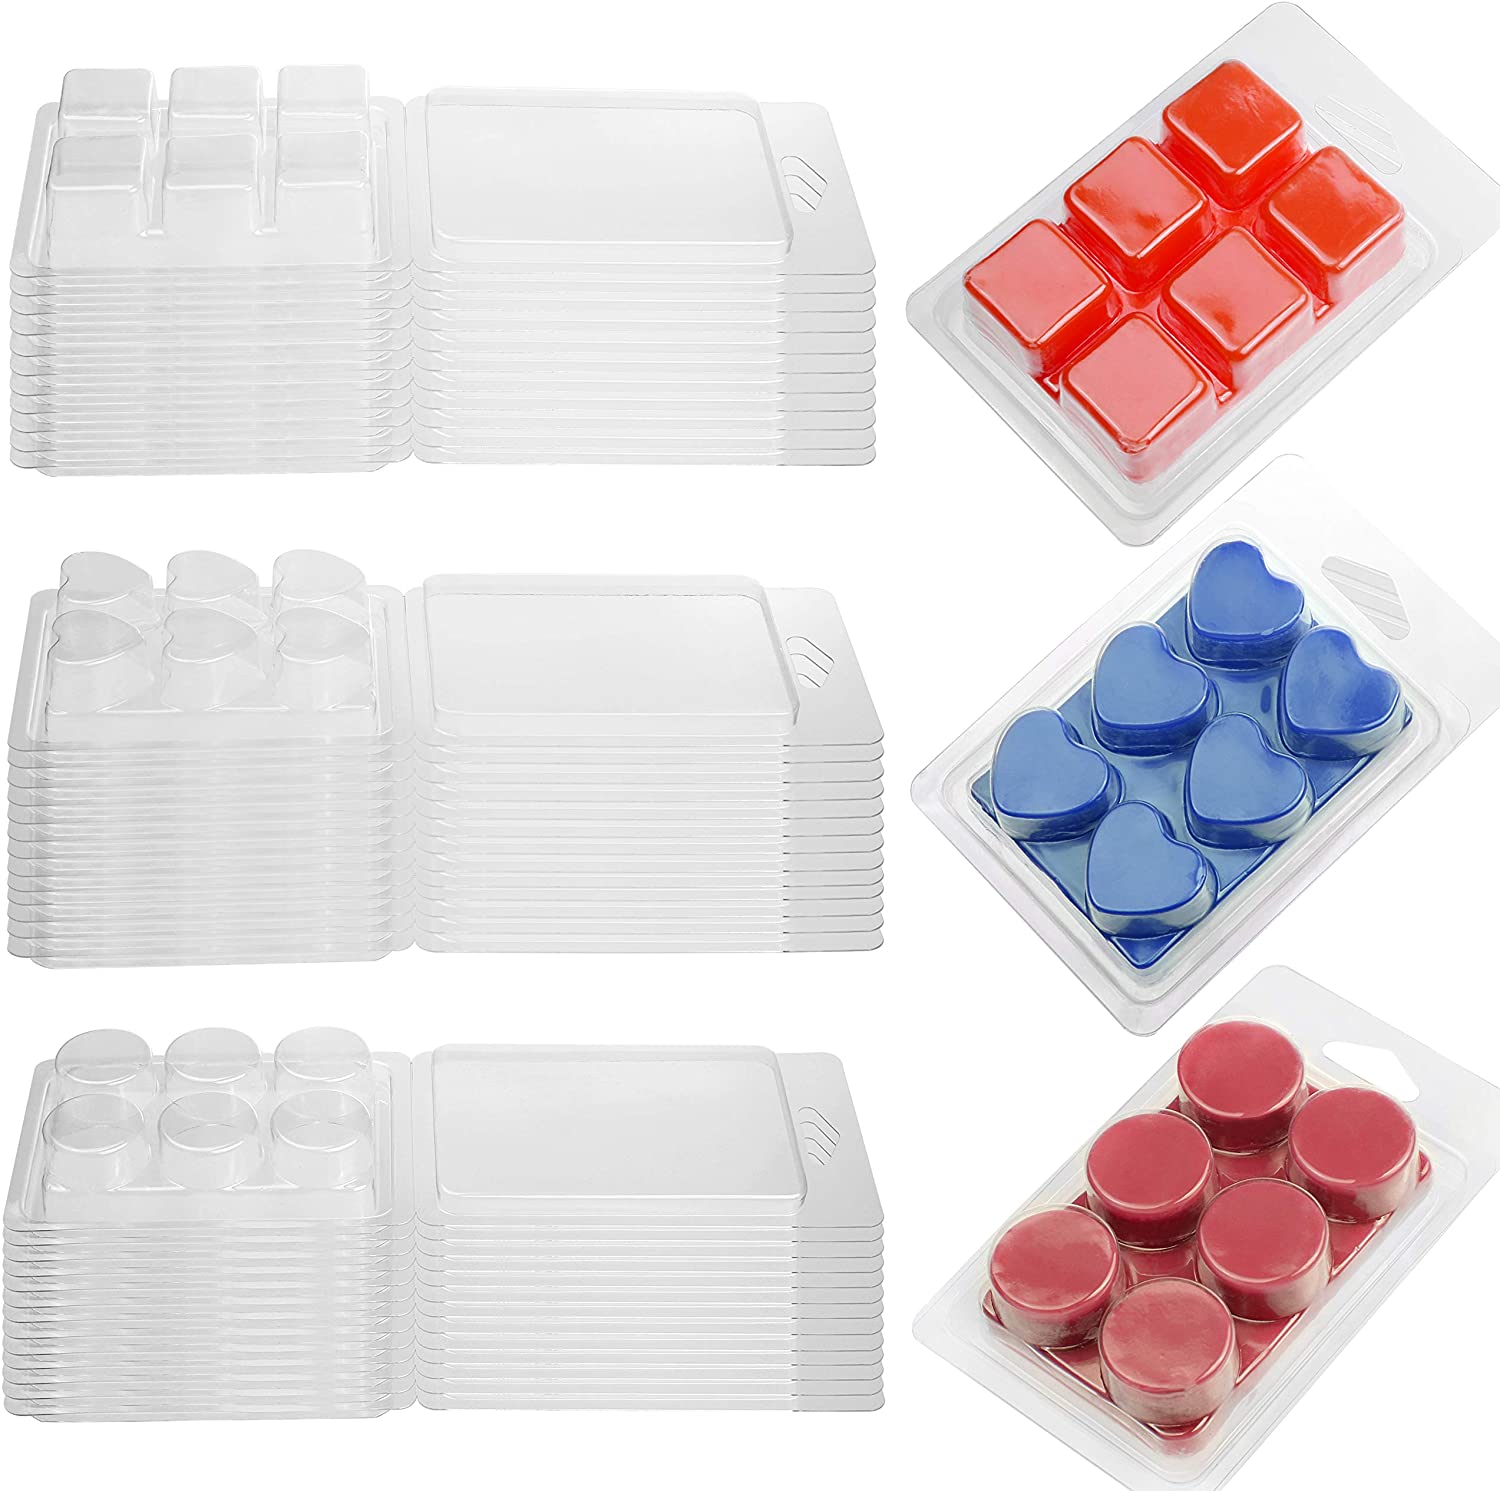 Packaging Box Soap Containers Wax Melt Clamshell Candle Mould Wax Melt Molds 